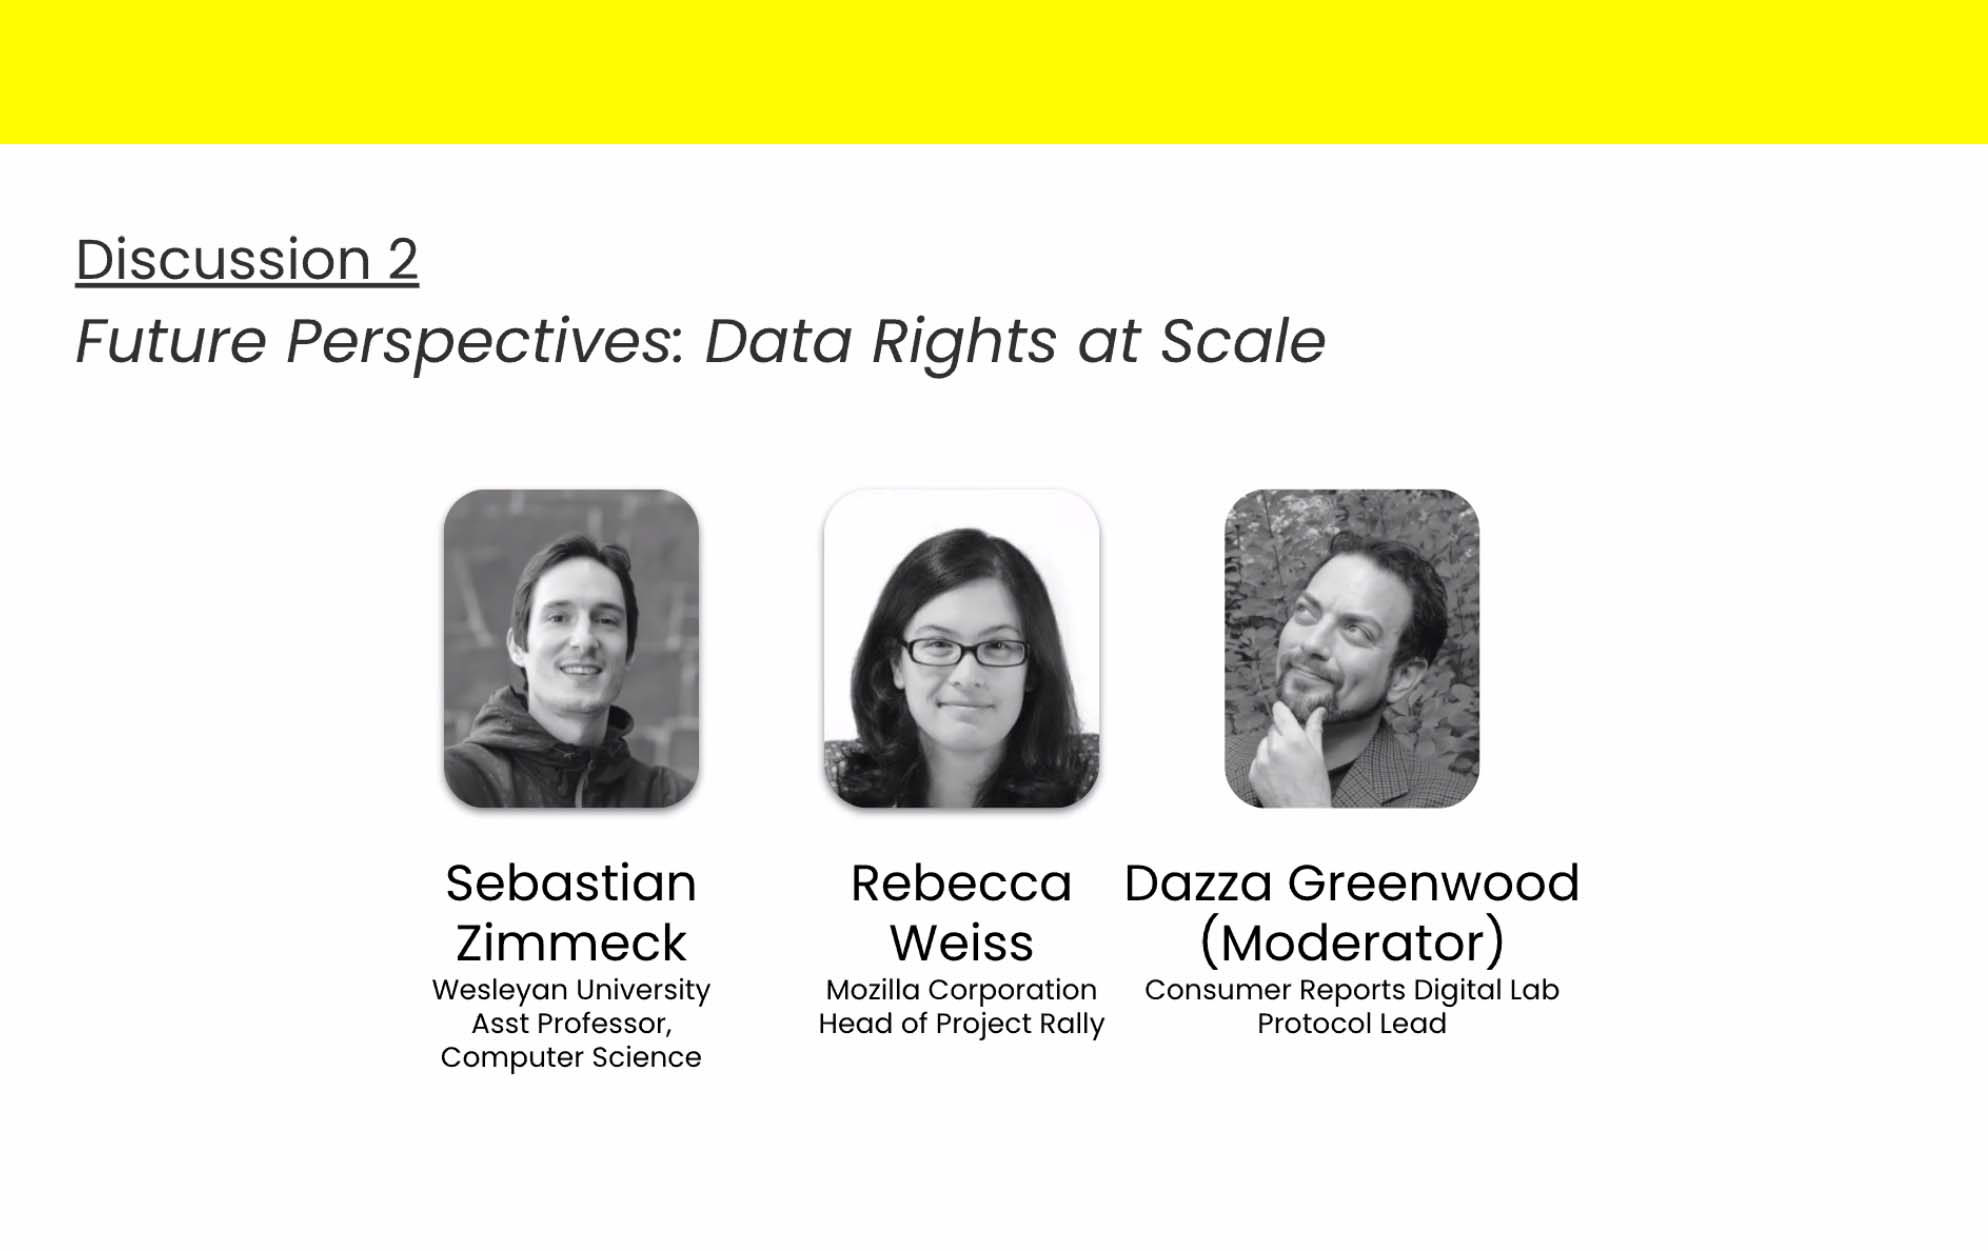 Announcement of the Data Rights Protocol roundtable event showing pictures of Sebastian Zimmeck, Rebecca Weiss, and Daza Greenwood.